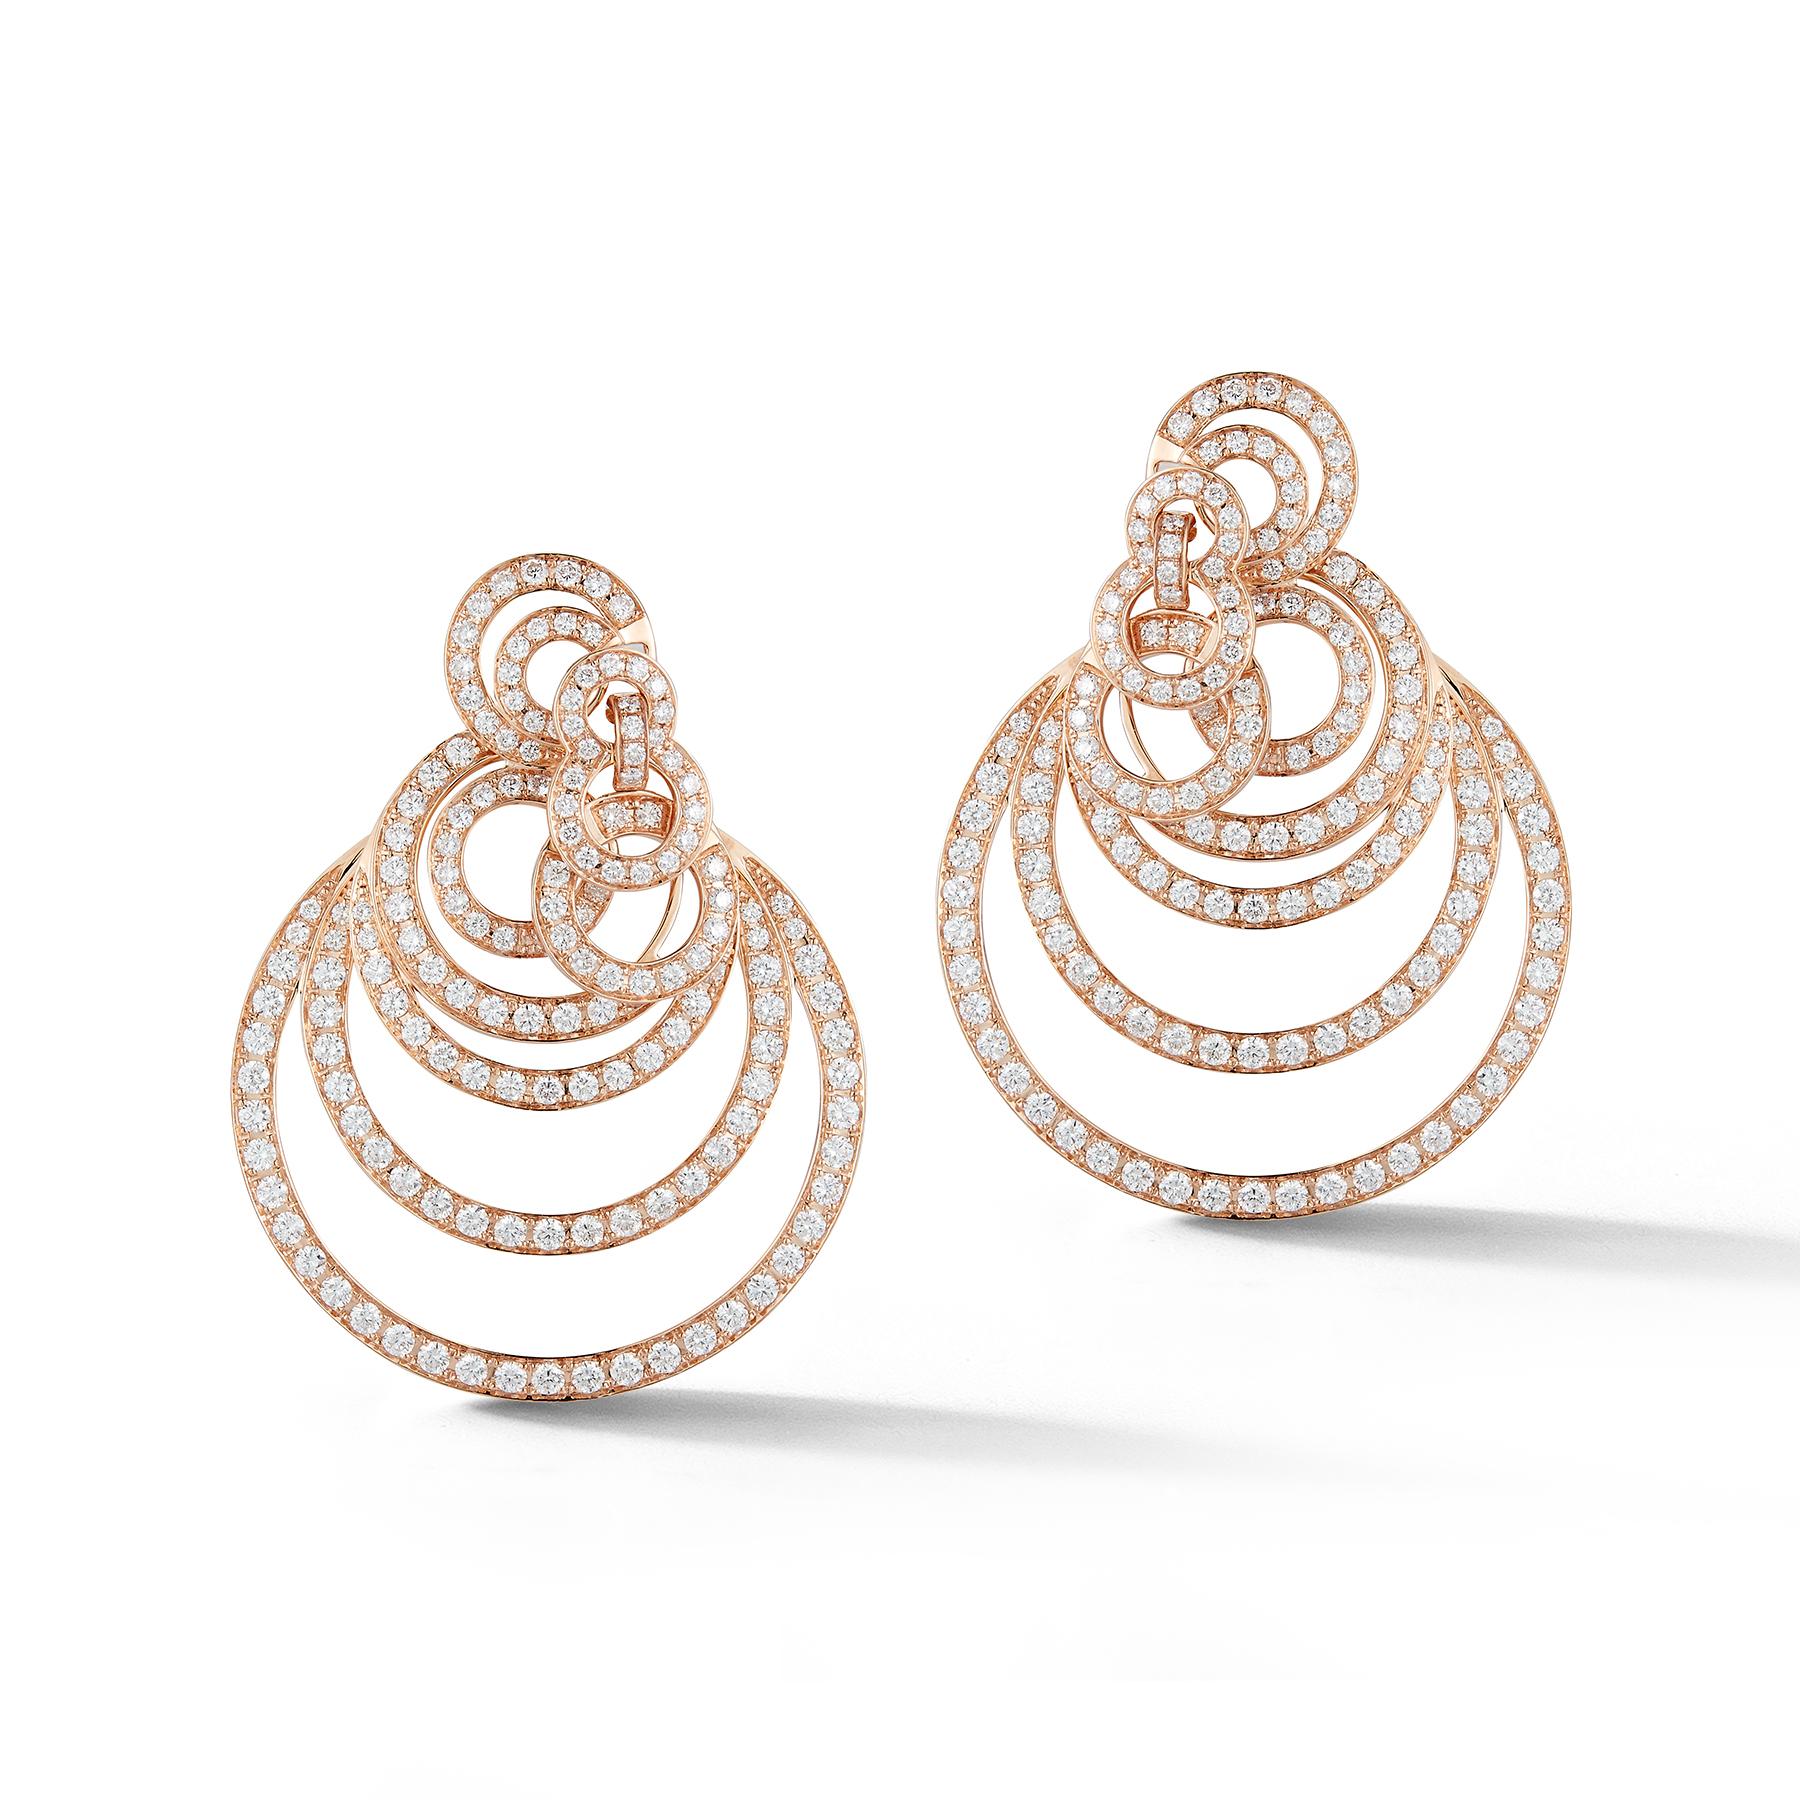 Modern yet Classic, Gorgeous Statement Earrings, Multi-layered 18K Pink Gold Hoops laden with 320 Flawless White Round Diamonds weighing 2.86 Carats.